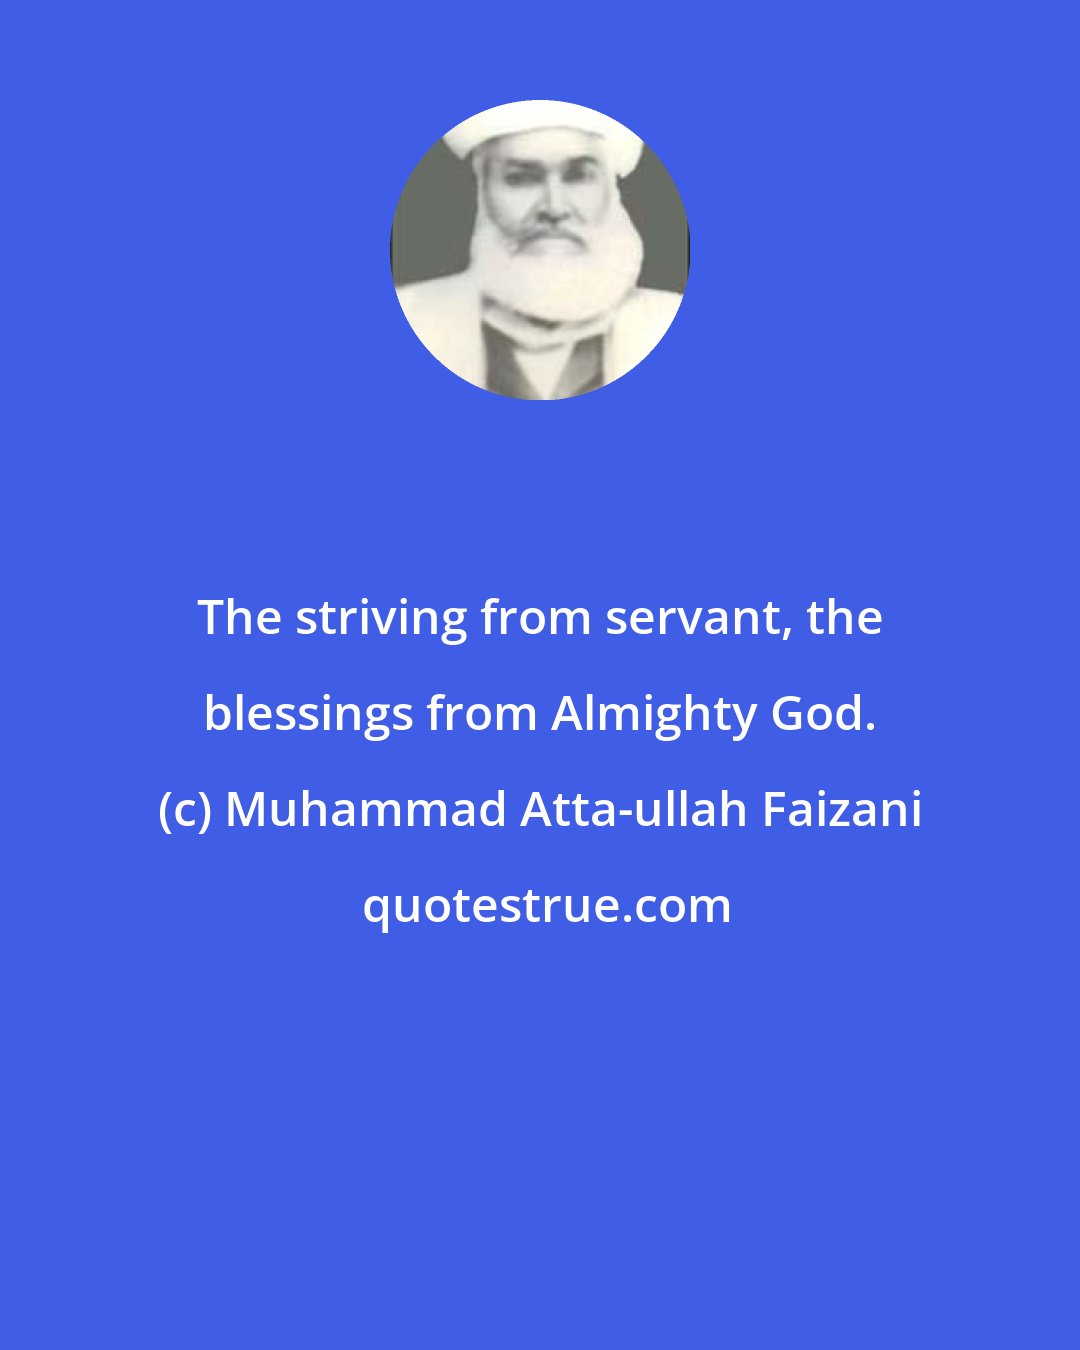 Muhammad Atta-ullah Faizani: The striving from servant, the blessings from Almighty God.